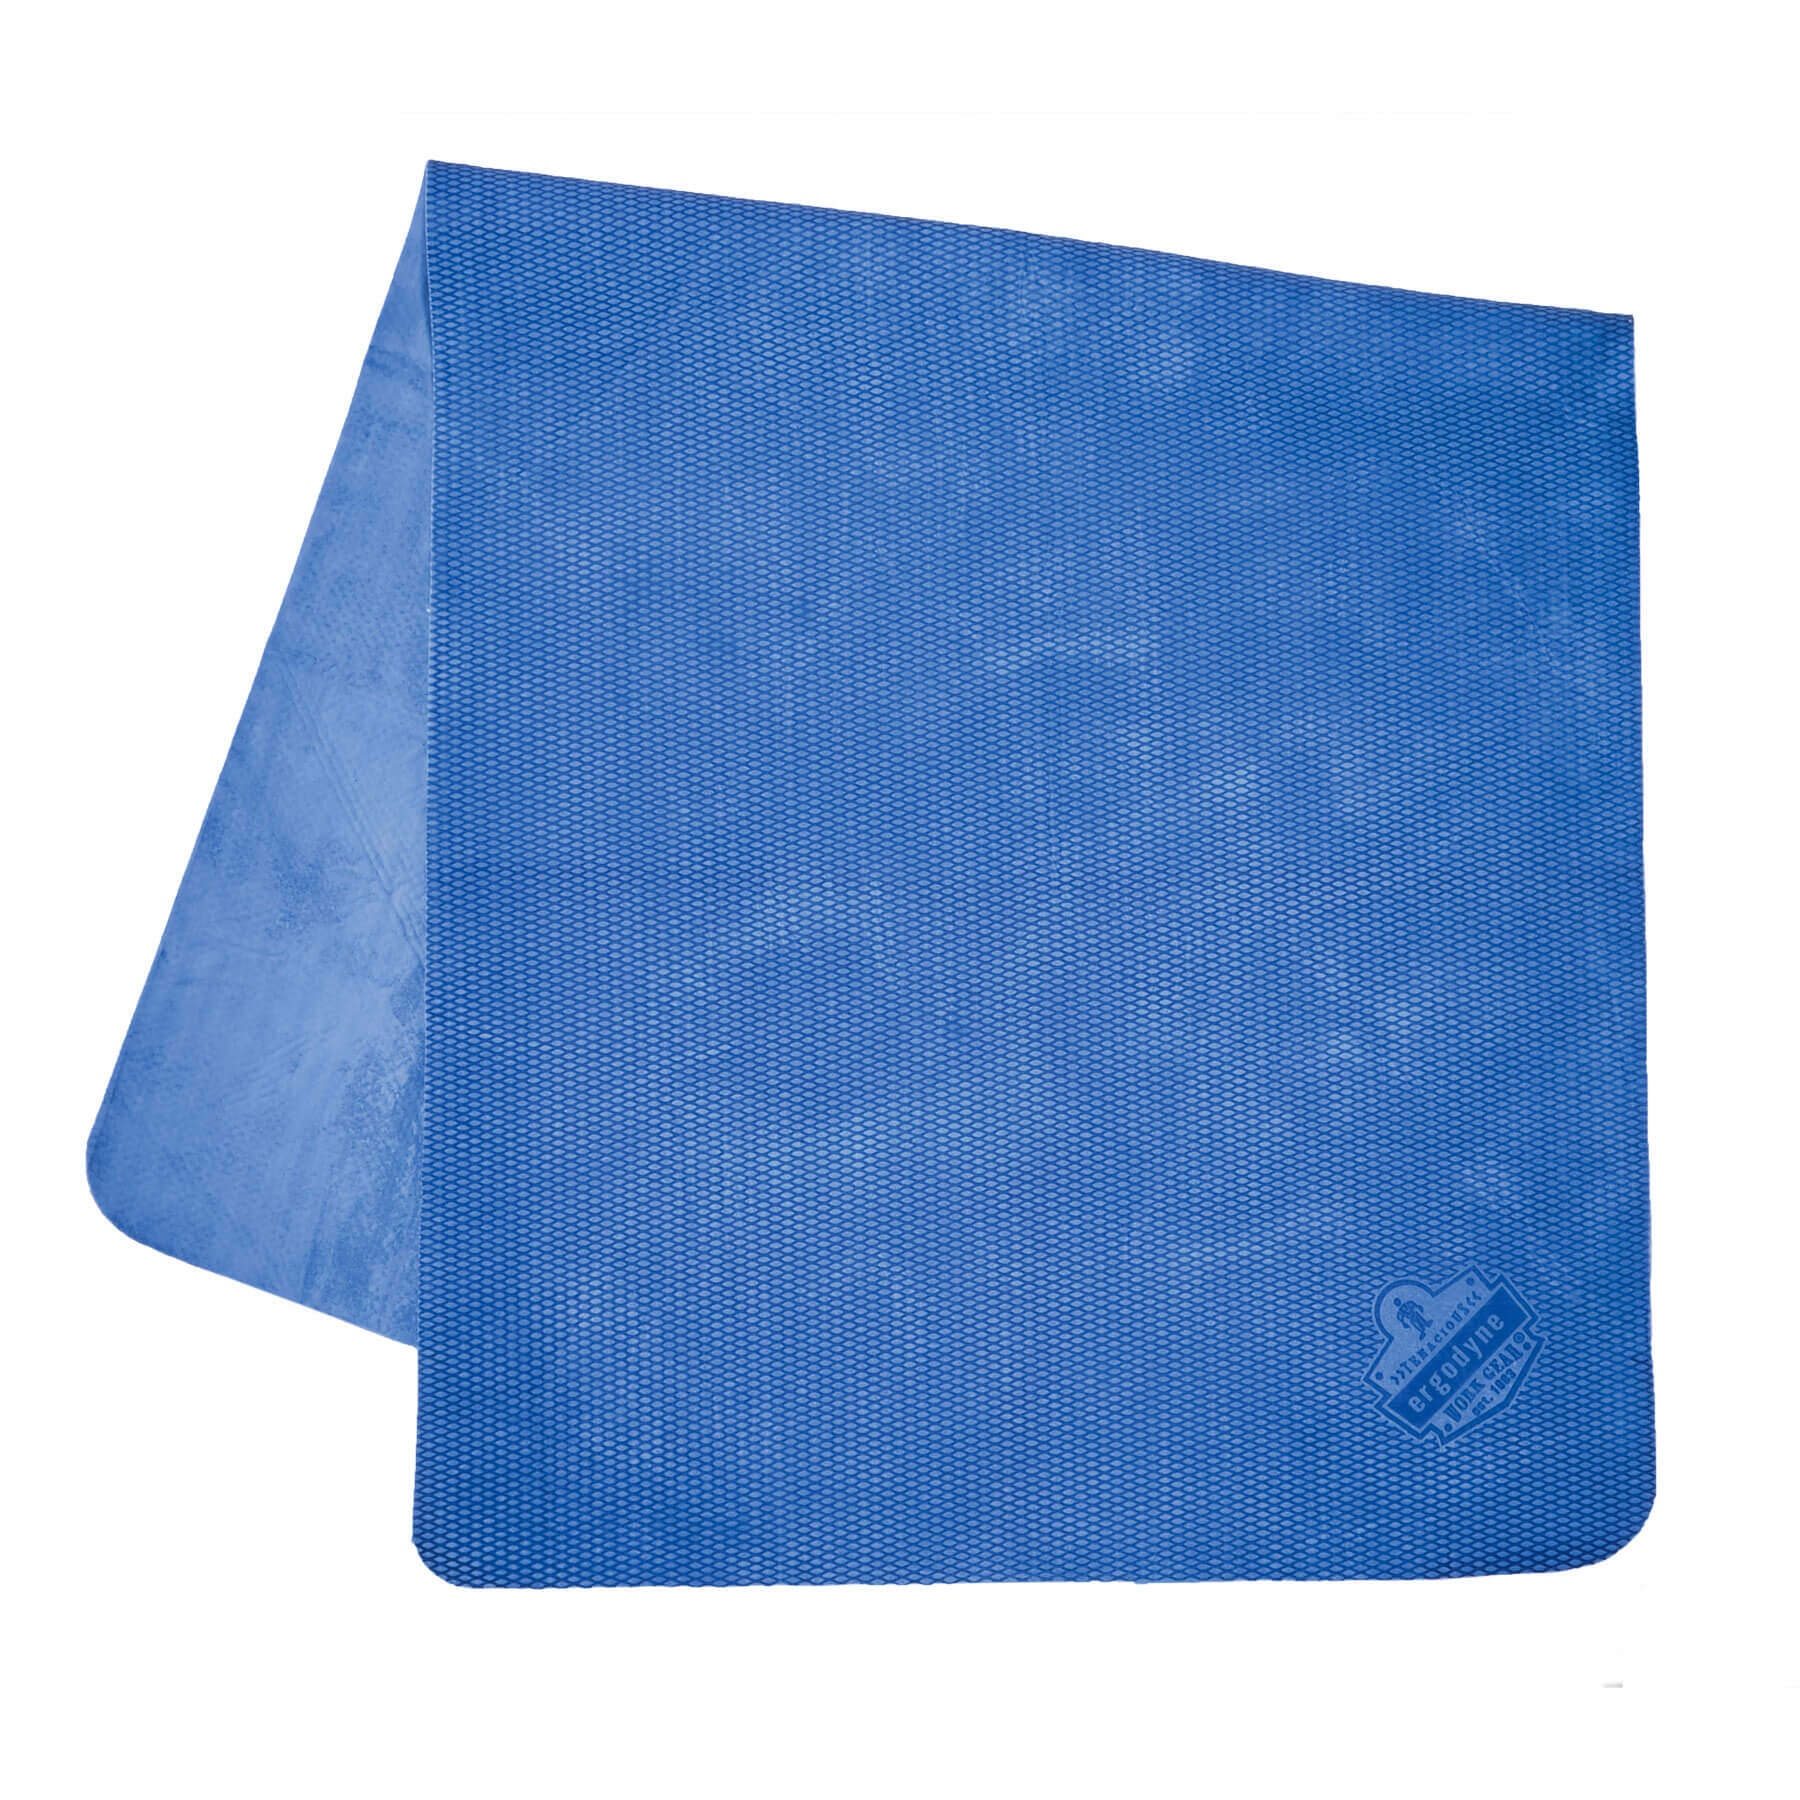 Ergodyne Chill-Its 6603 Evaporative Cooling Band Towel Blue OF NEW Free Ship 